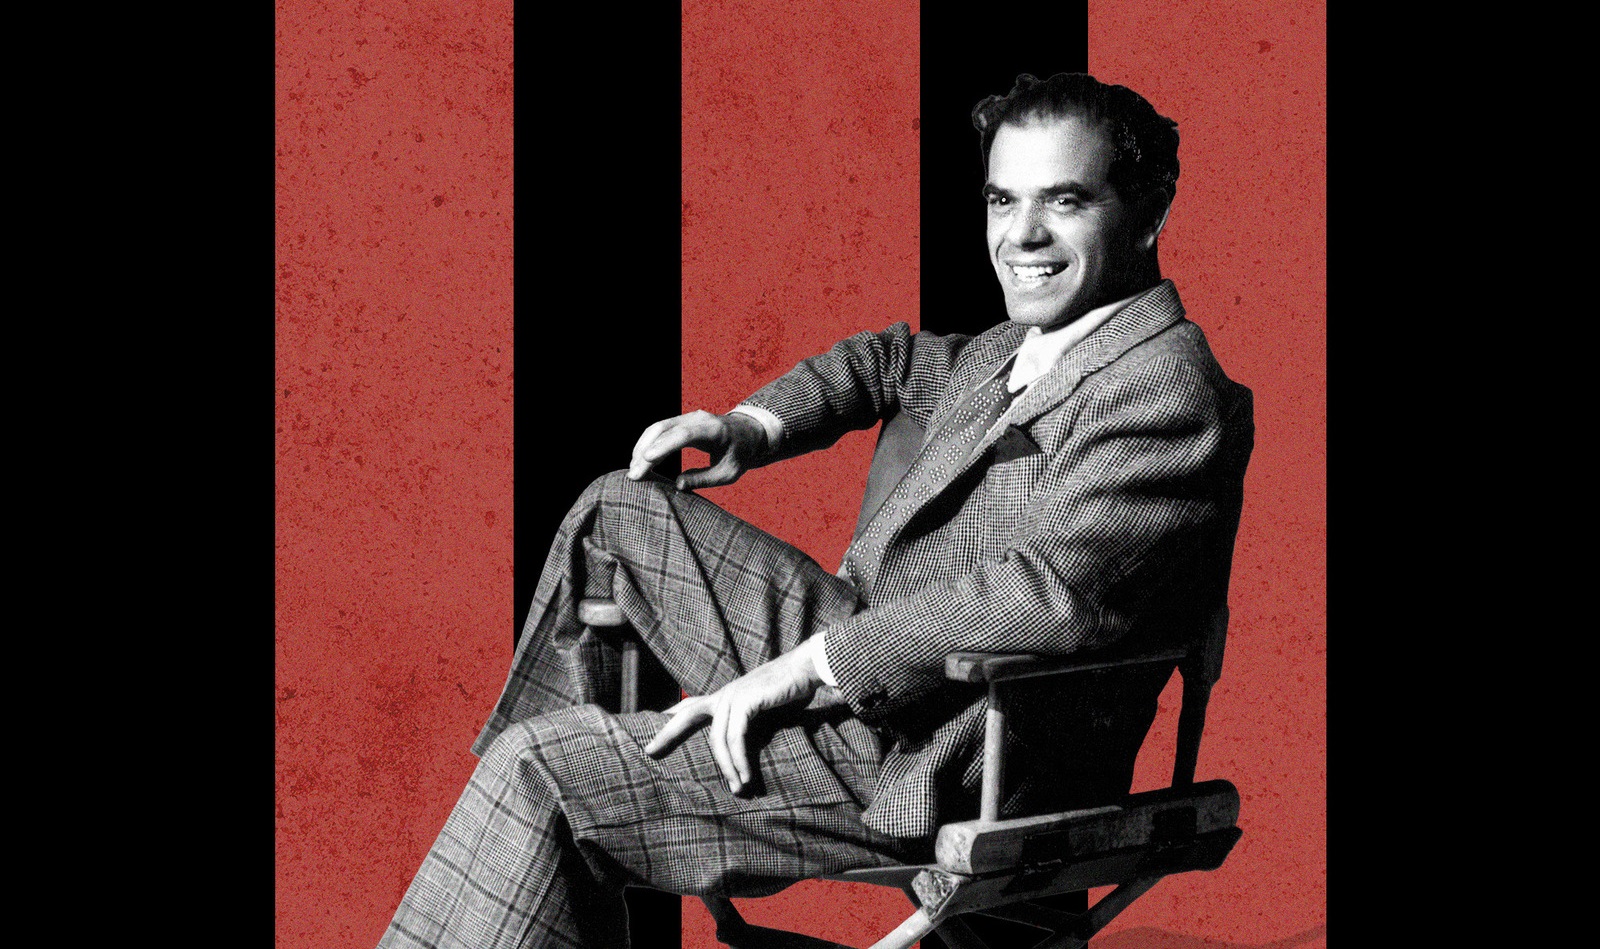 black and white image of a man sitting in a chair with red and black striped background